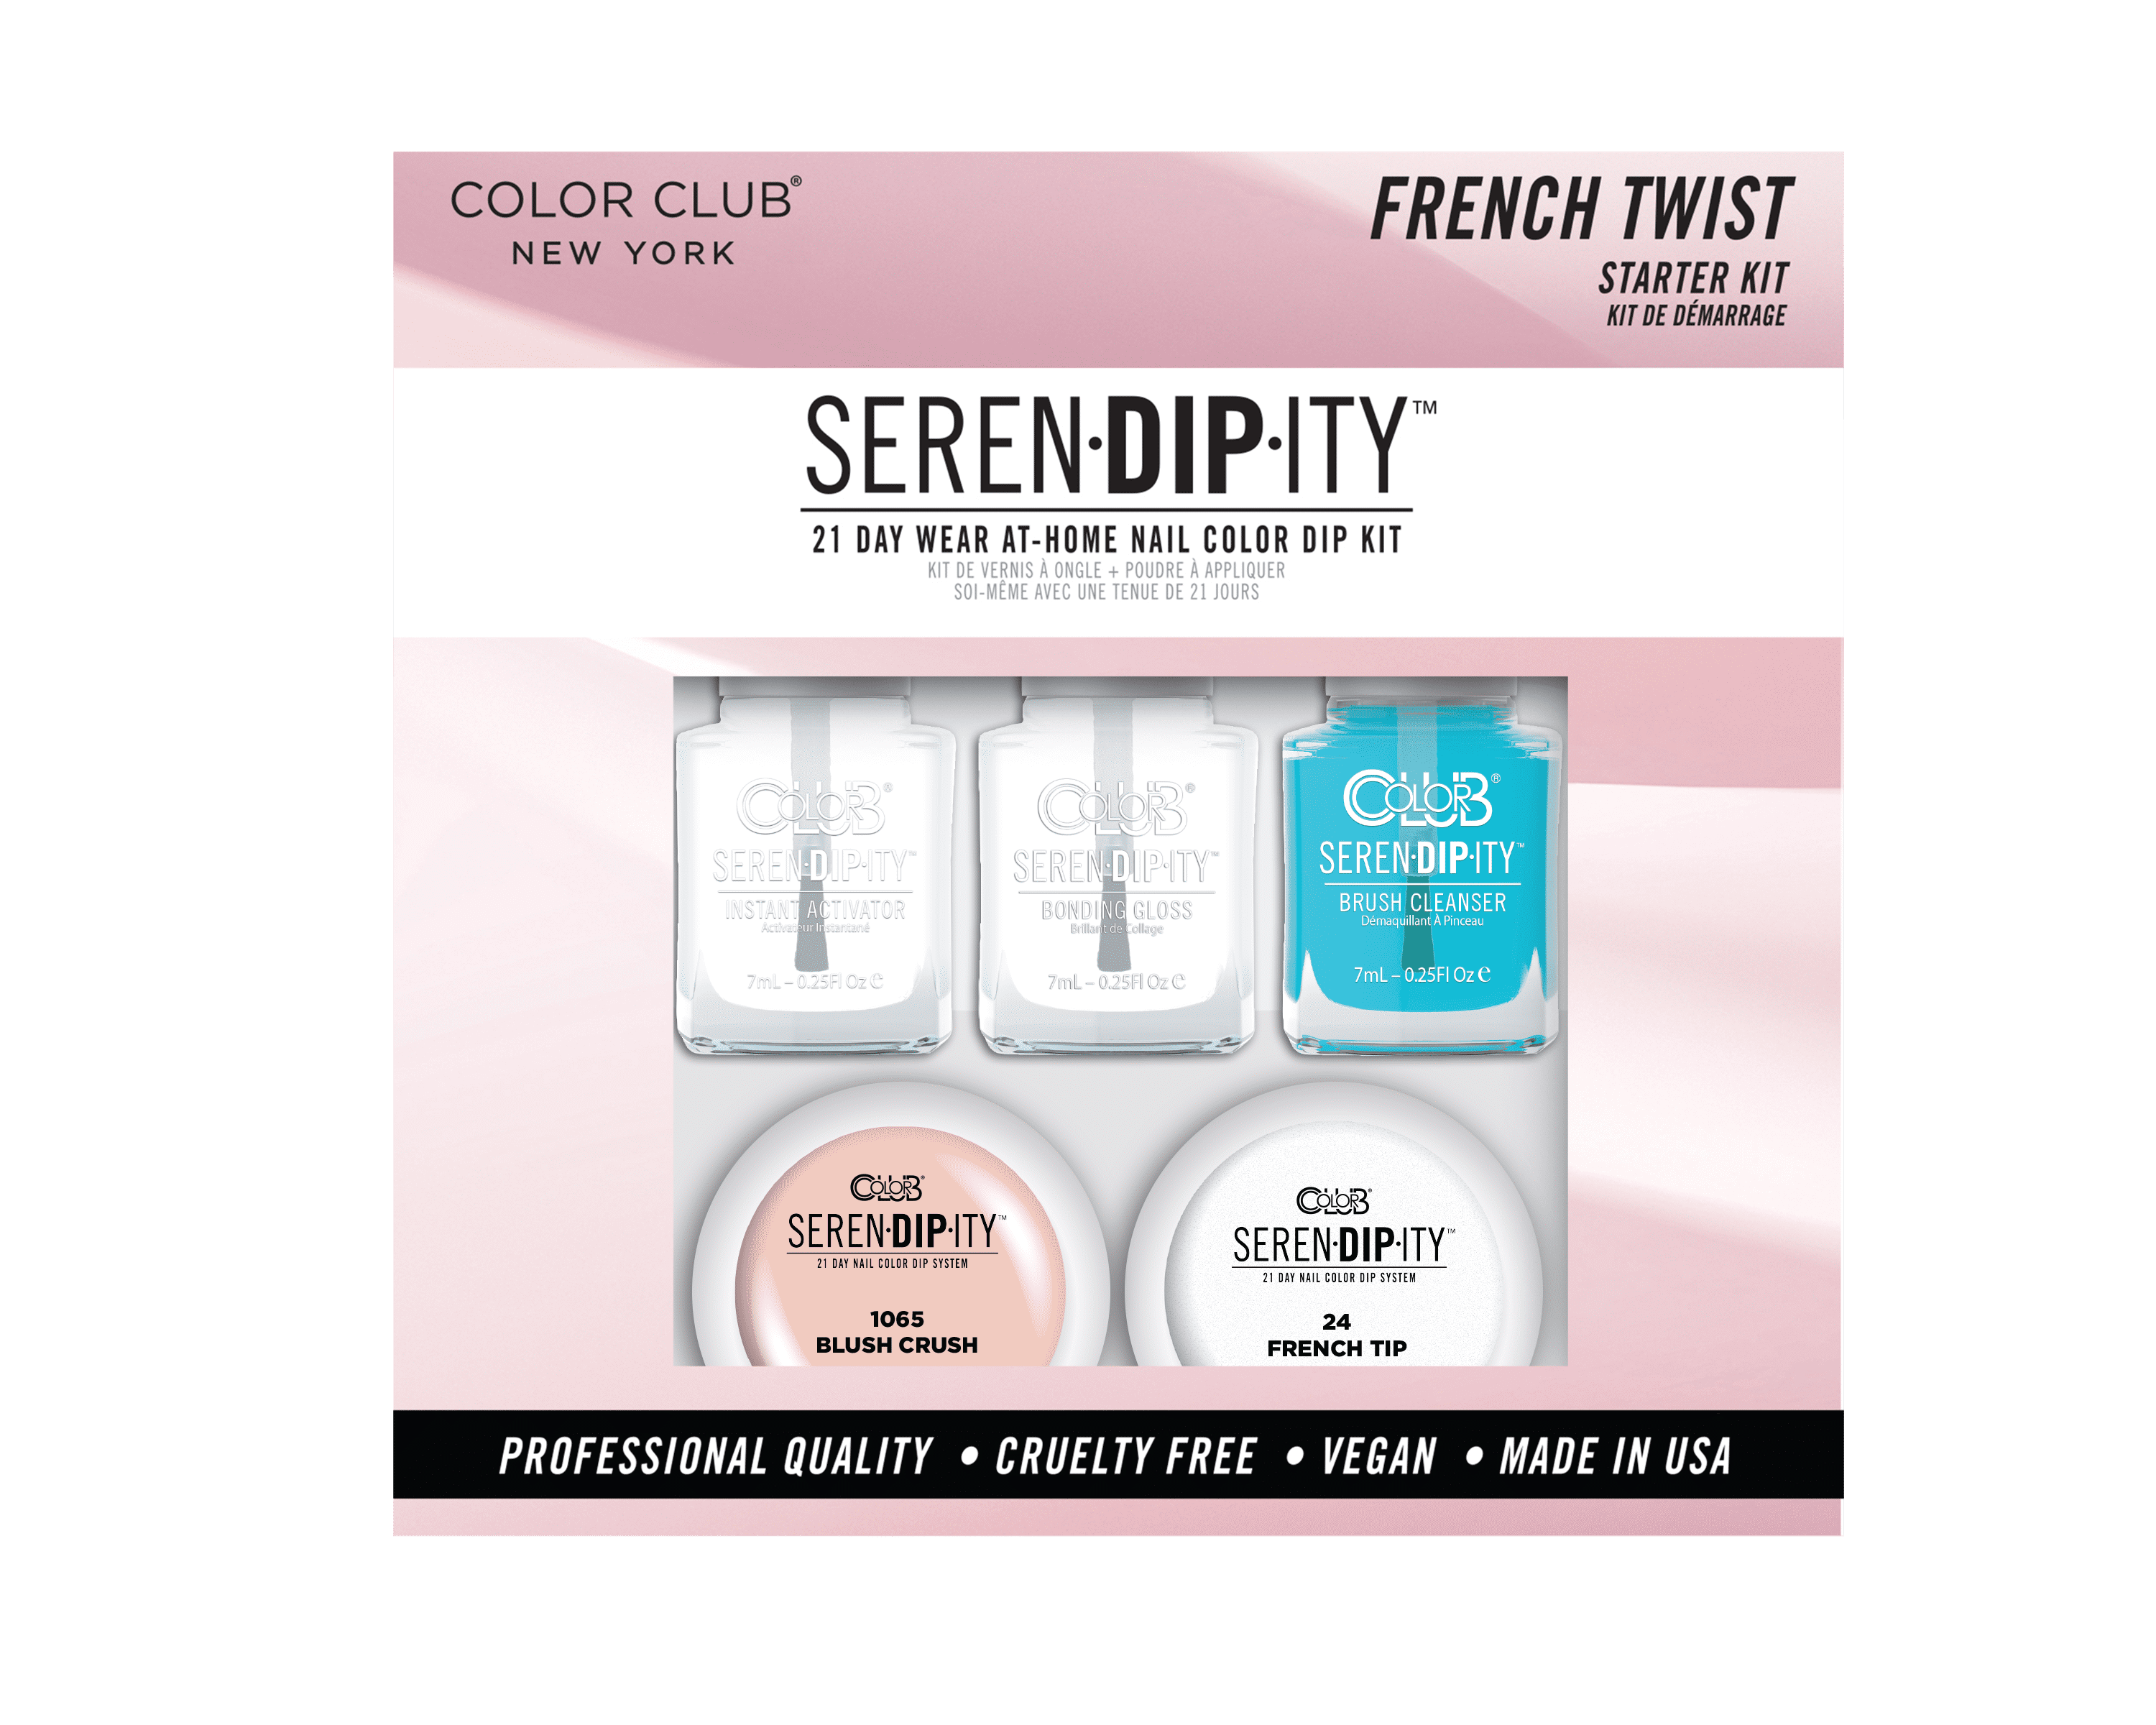 Color Club Classic Serendipity Kit - wide 3